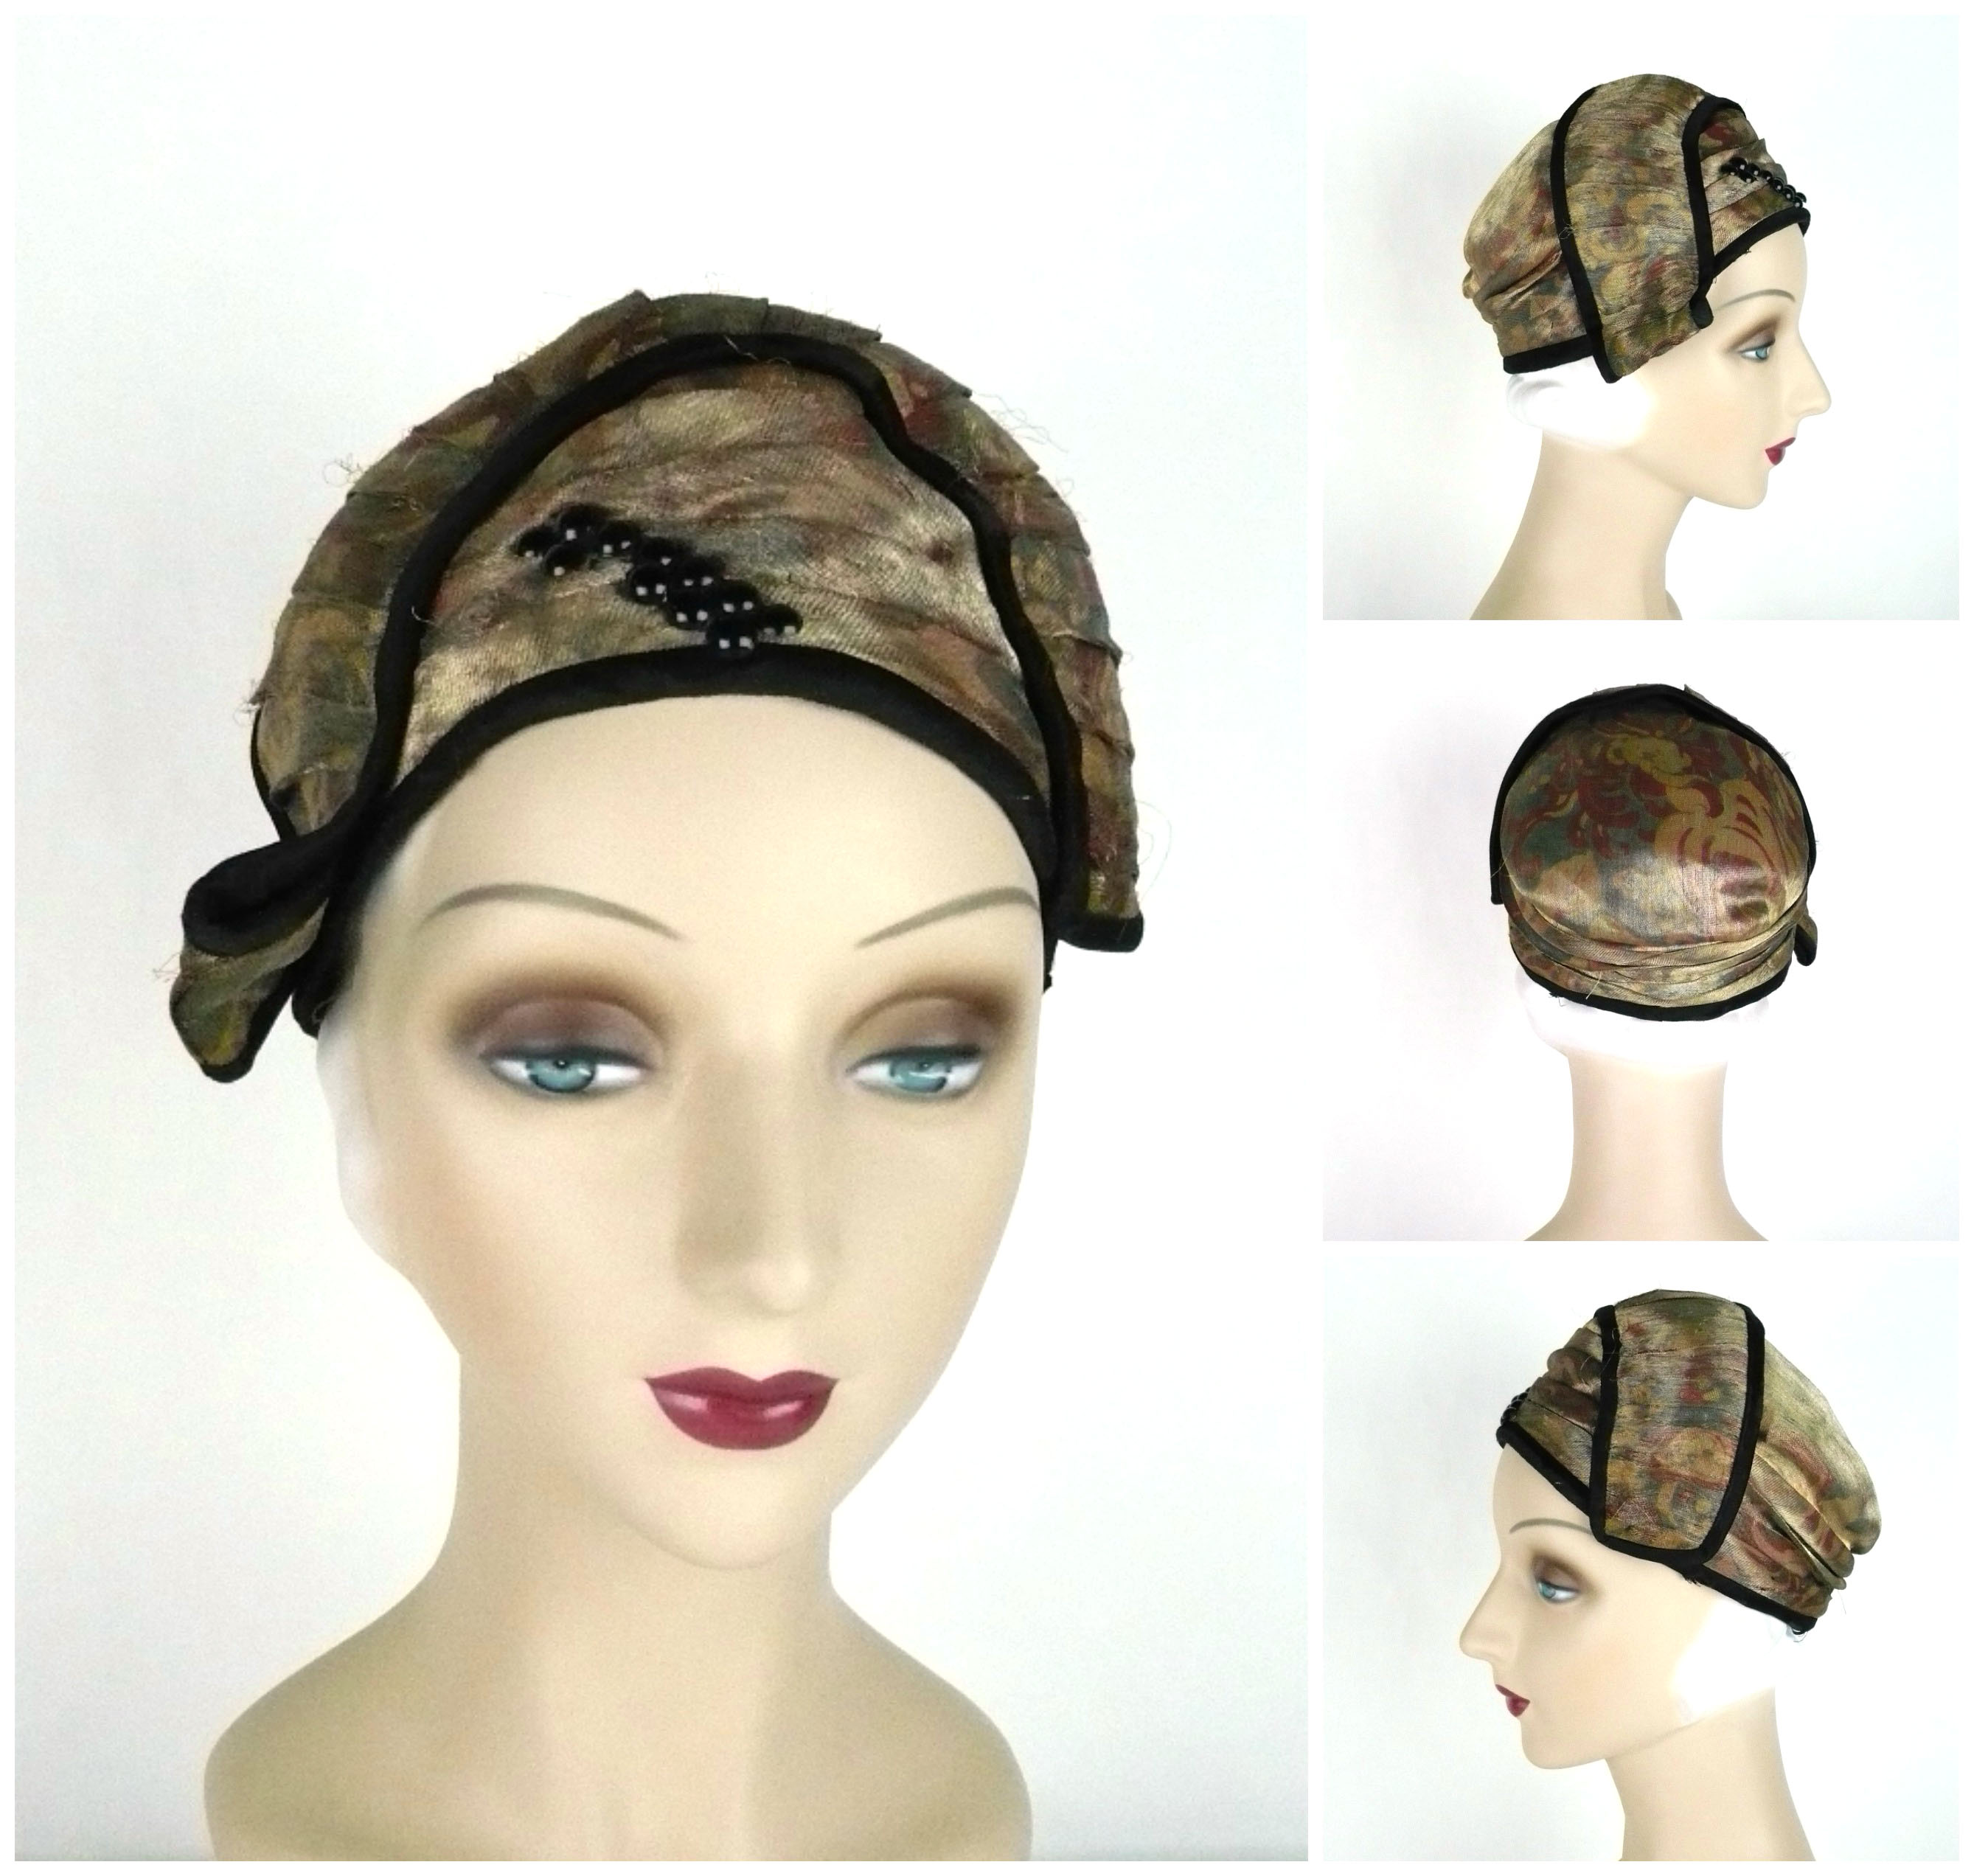 Ian Drummond Collection 20s hats 8